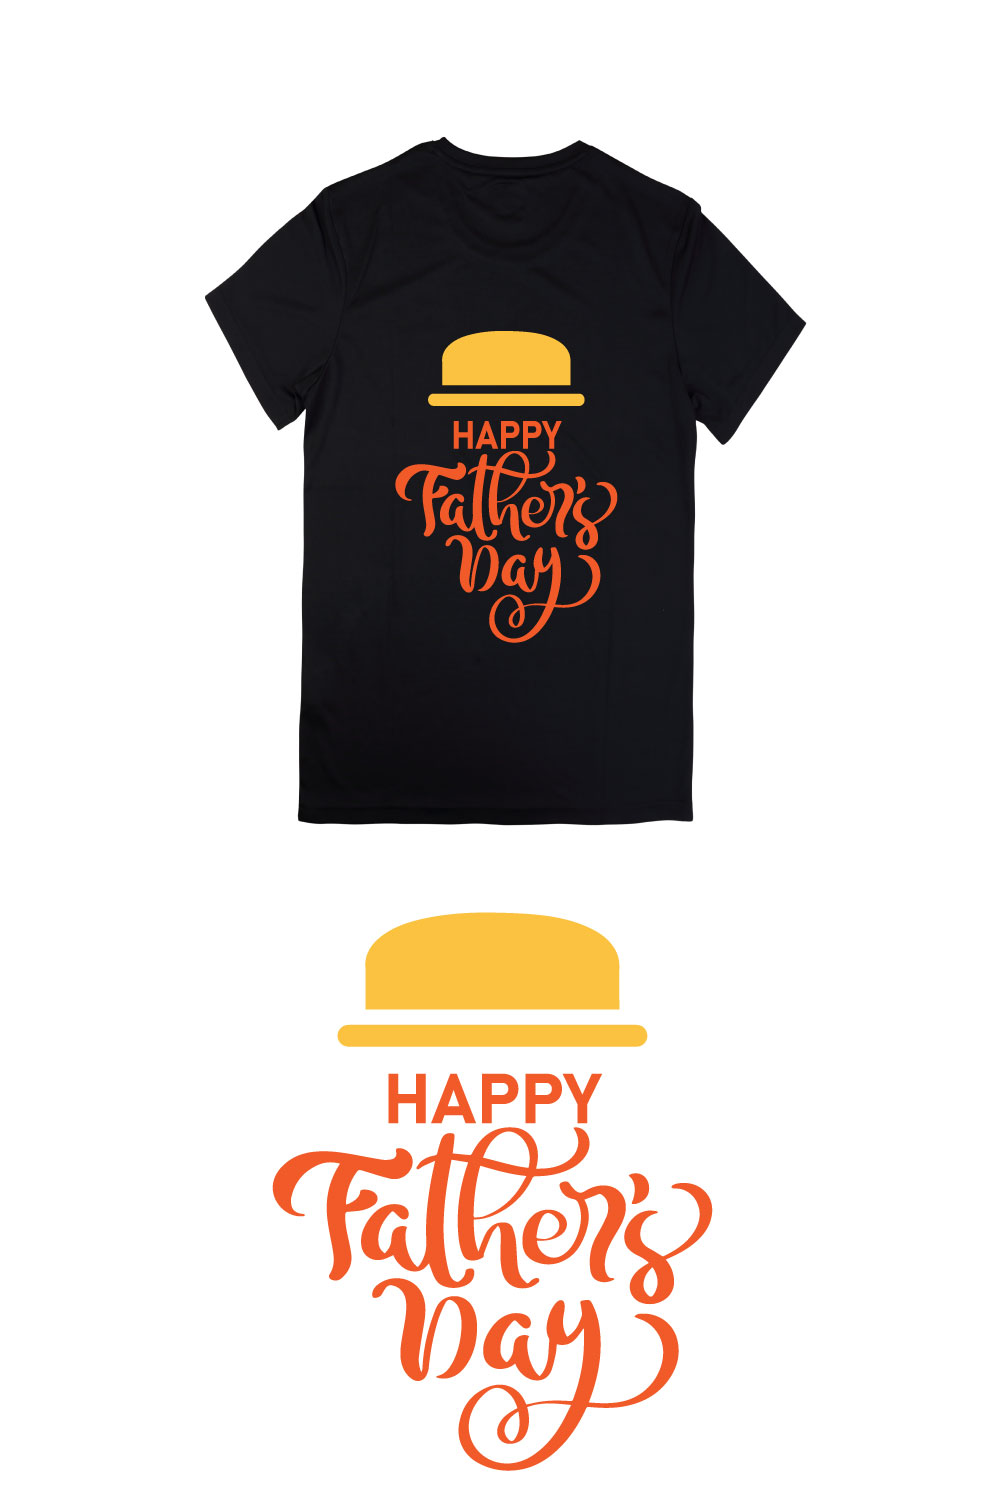 fathers day t-shirt design pinterest preview image.